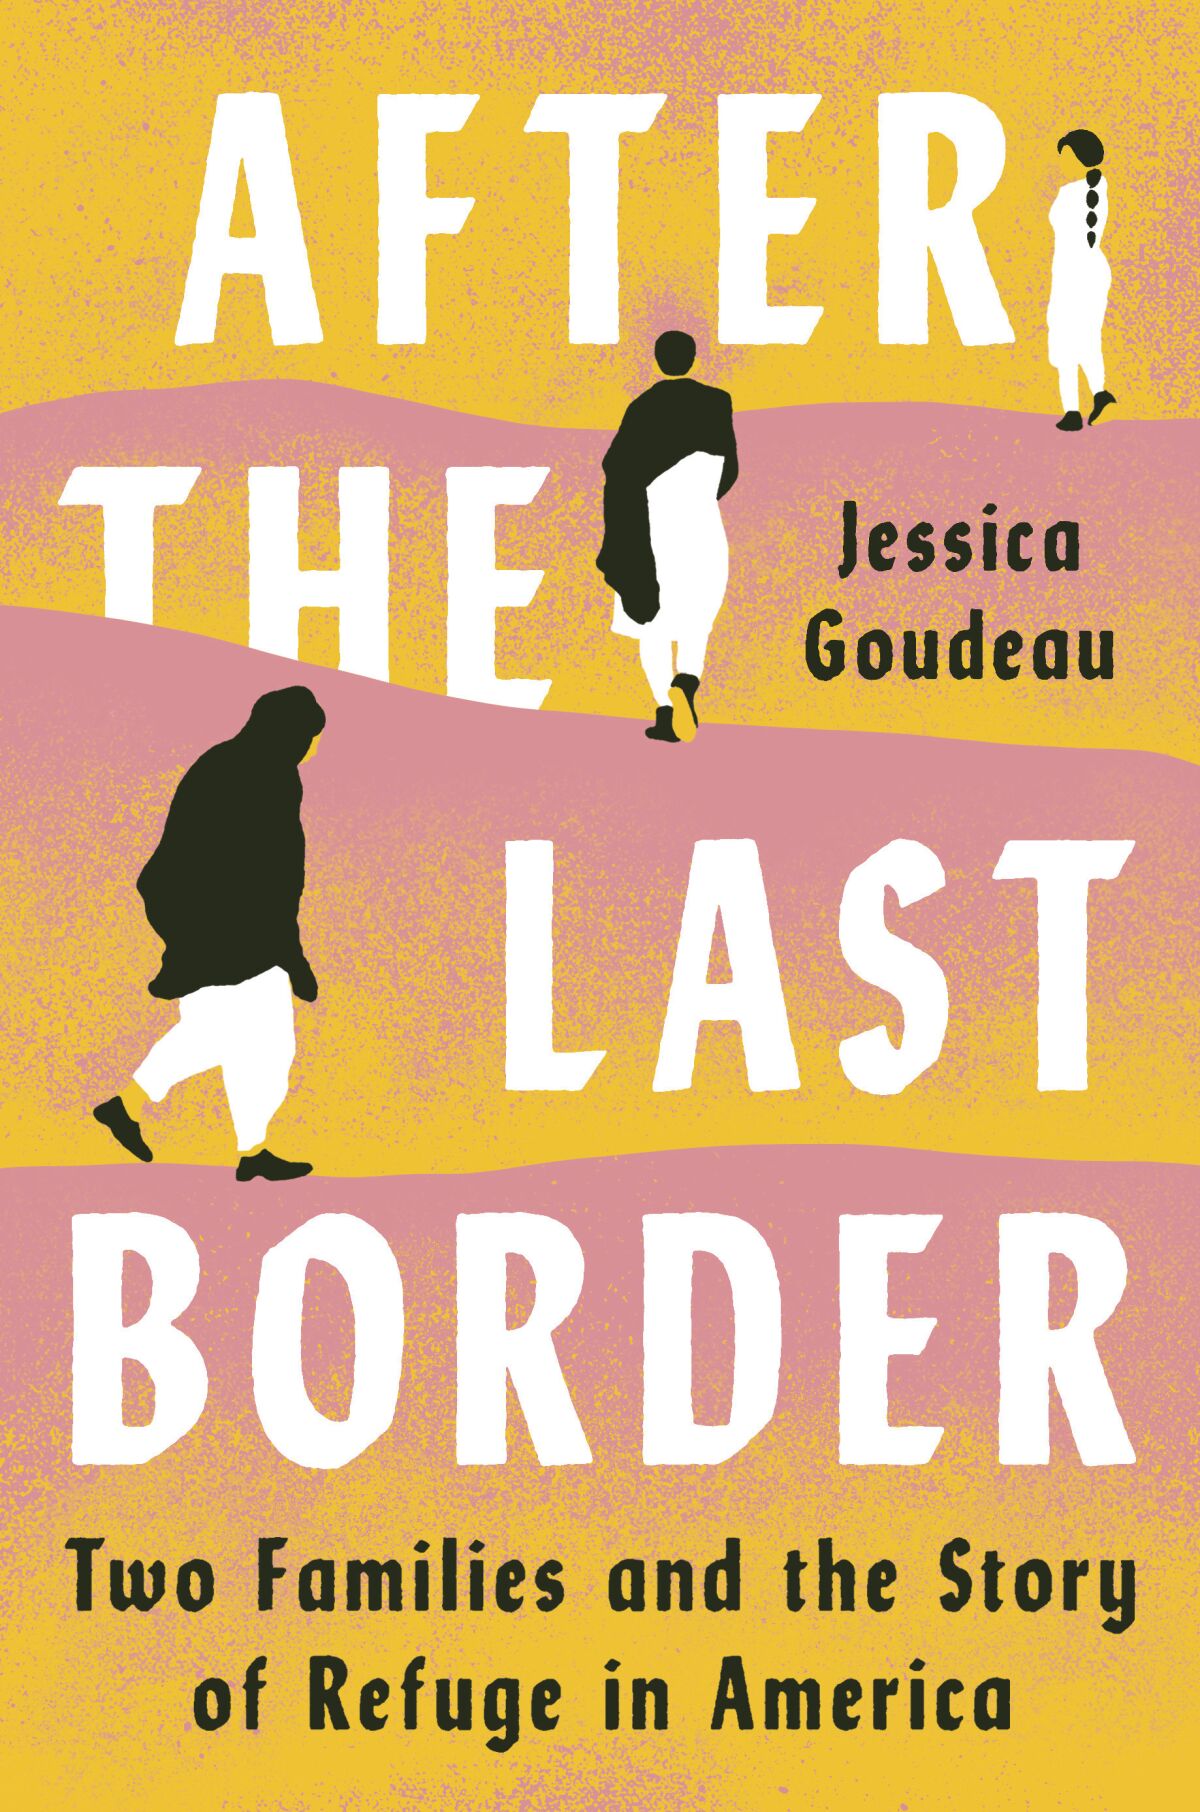 This cover image released by Viking shows "After the Last Border: Two Families and the Story of Refuge in America," by Jessica Goudeau. (Viking via AP)